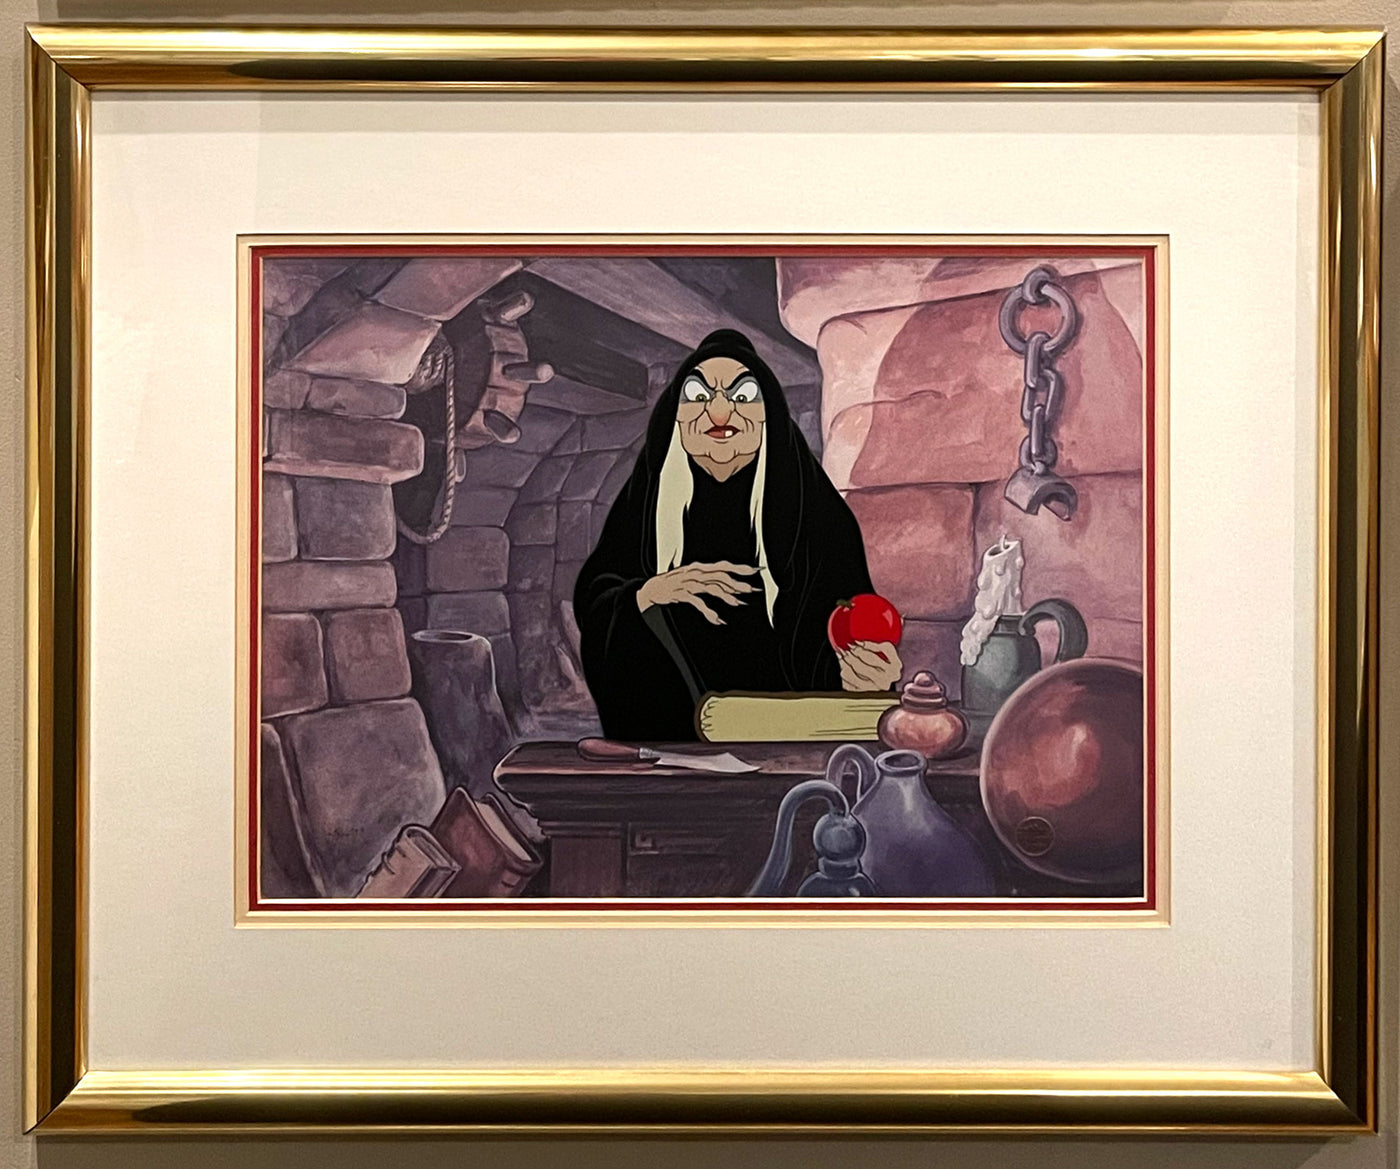 Walt Disney Animation Art Limited Edition Cel Featuring Old Witch from "Disney Villains Volume I," Signed by Ollie Johnston and Frank Thomas